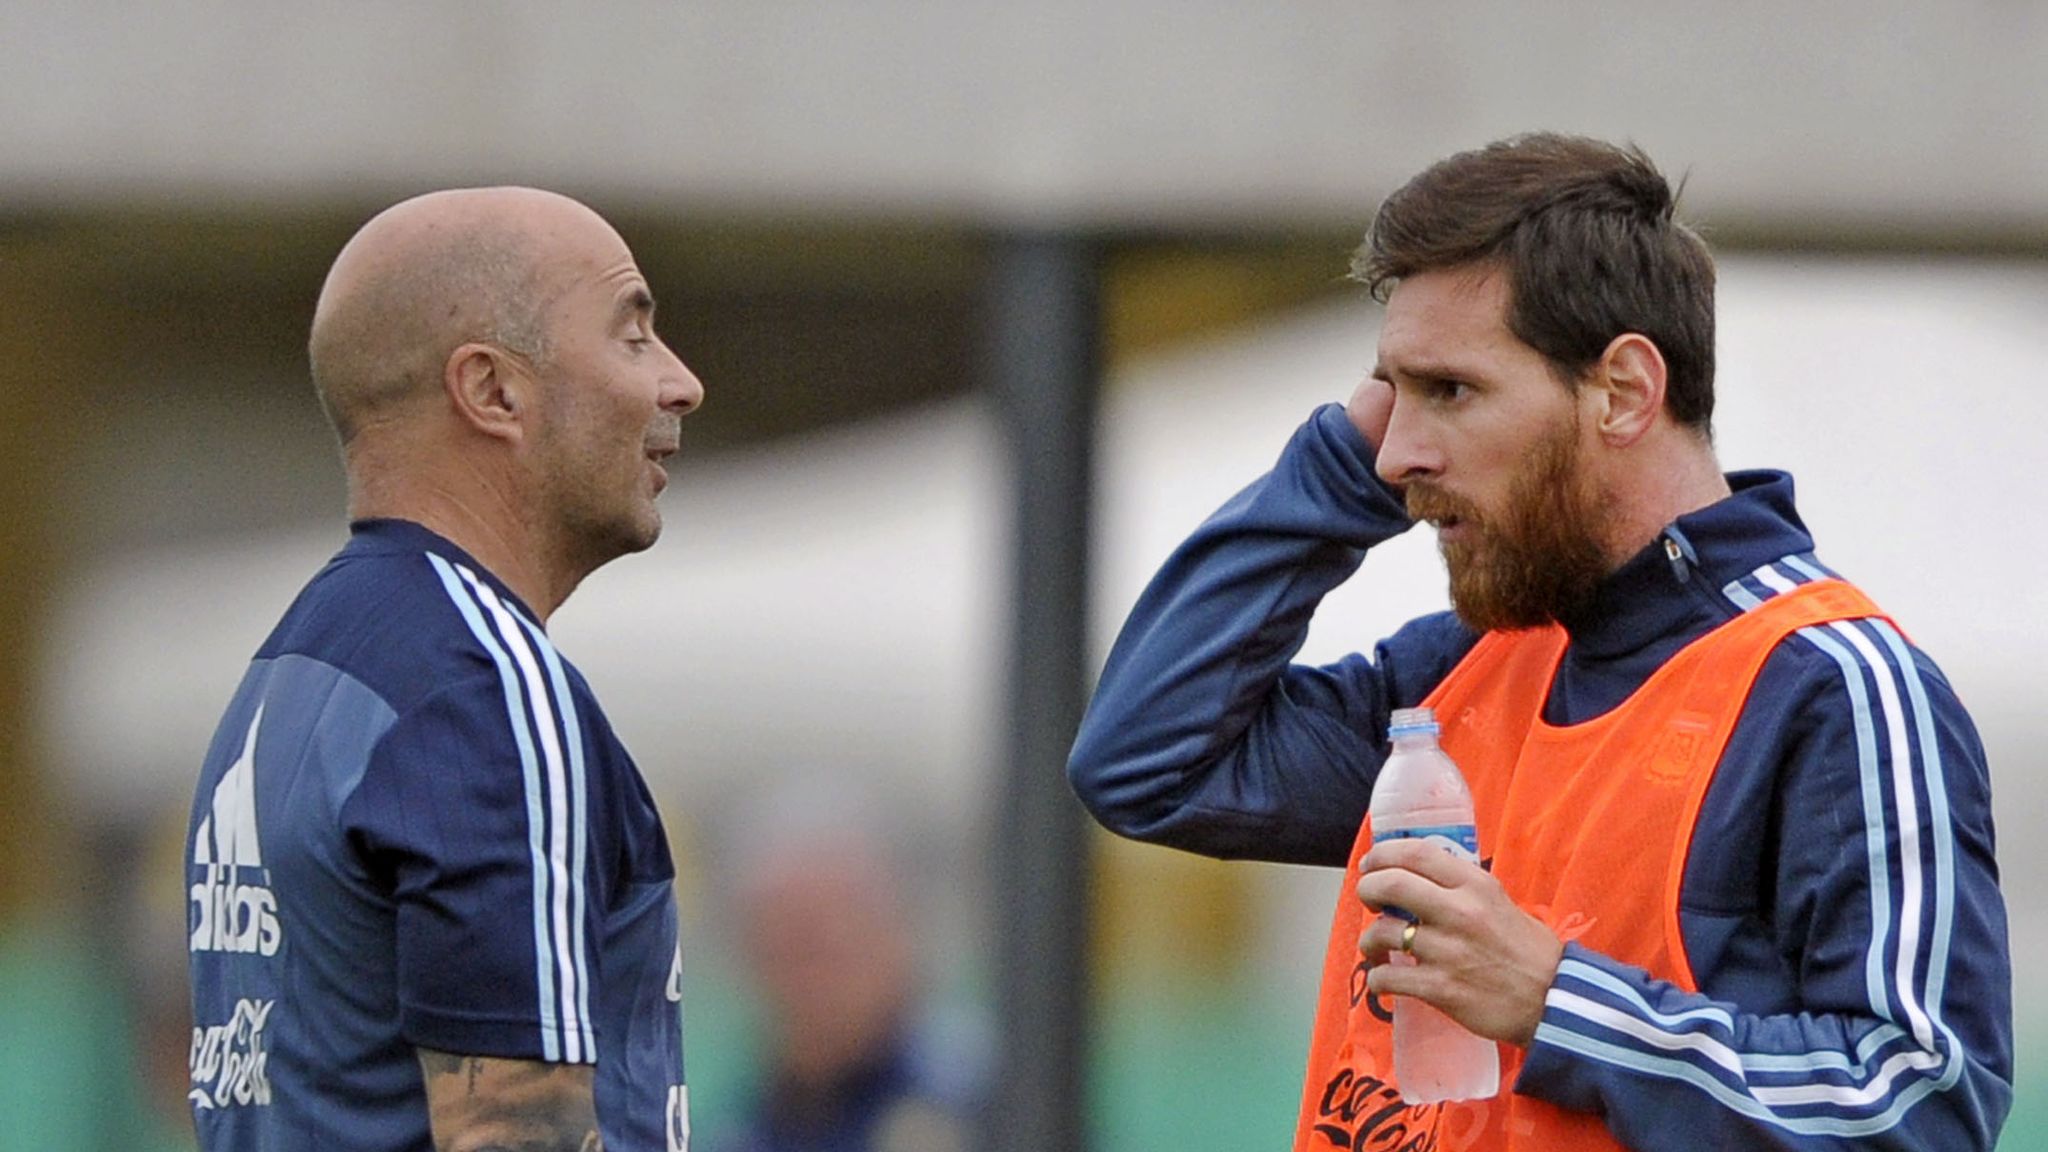 Brazil will stay true to their identity against Messi's Argentina - coach